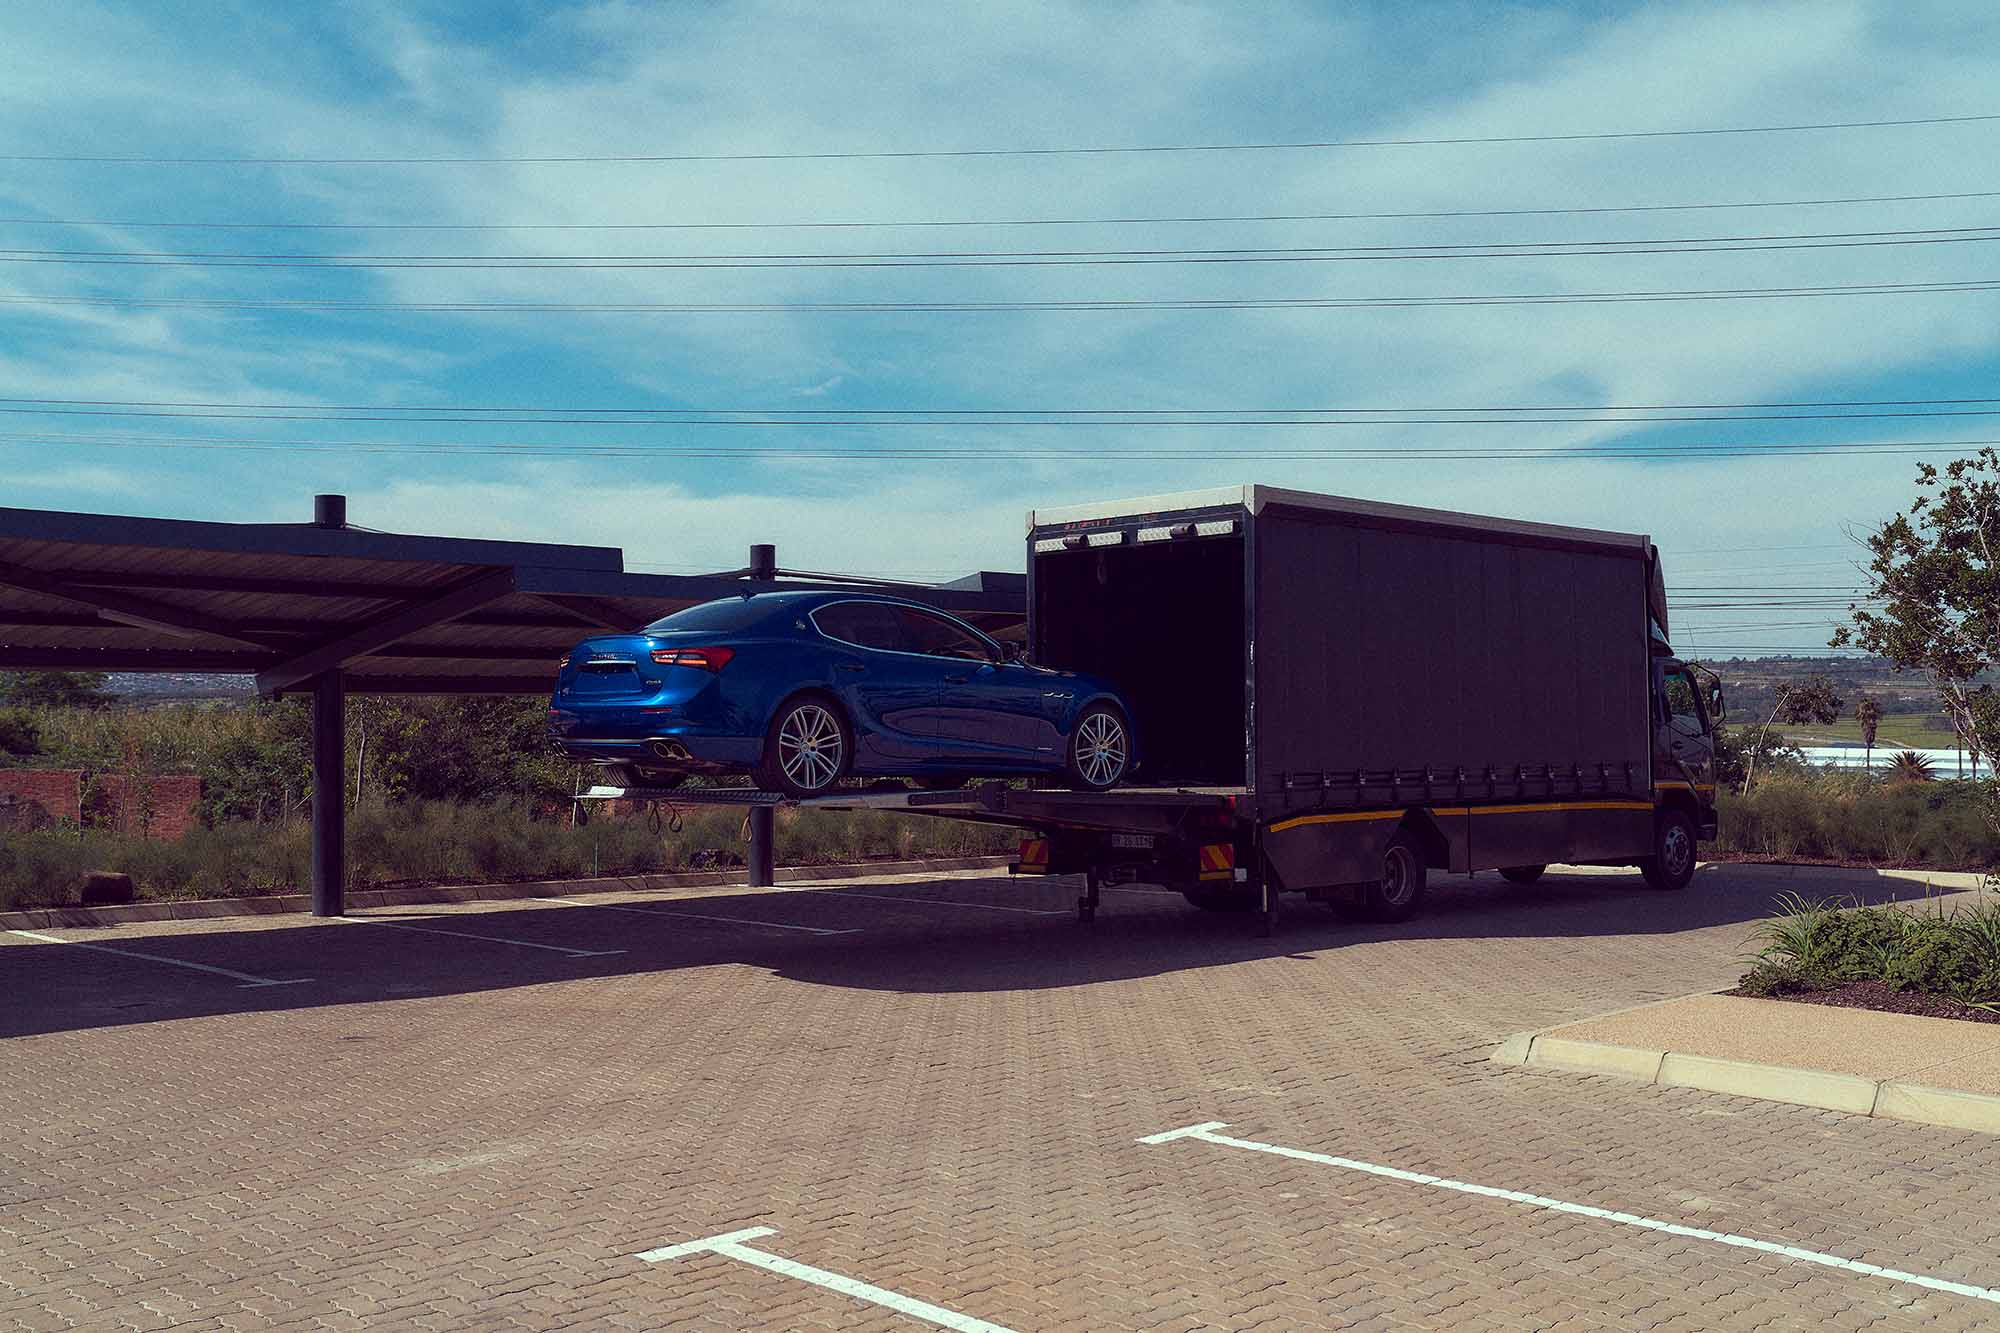 Maserati car in a vibrant blue being offloaded in Christchurch. The car's streamlined body, iconic front grille, and stylish headlights exude luxury and performance in this automotive photograph.